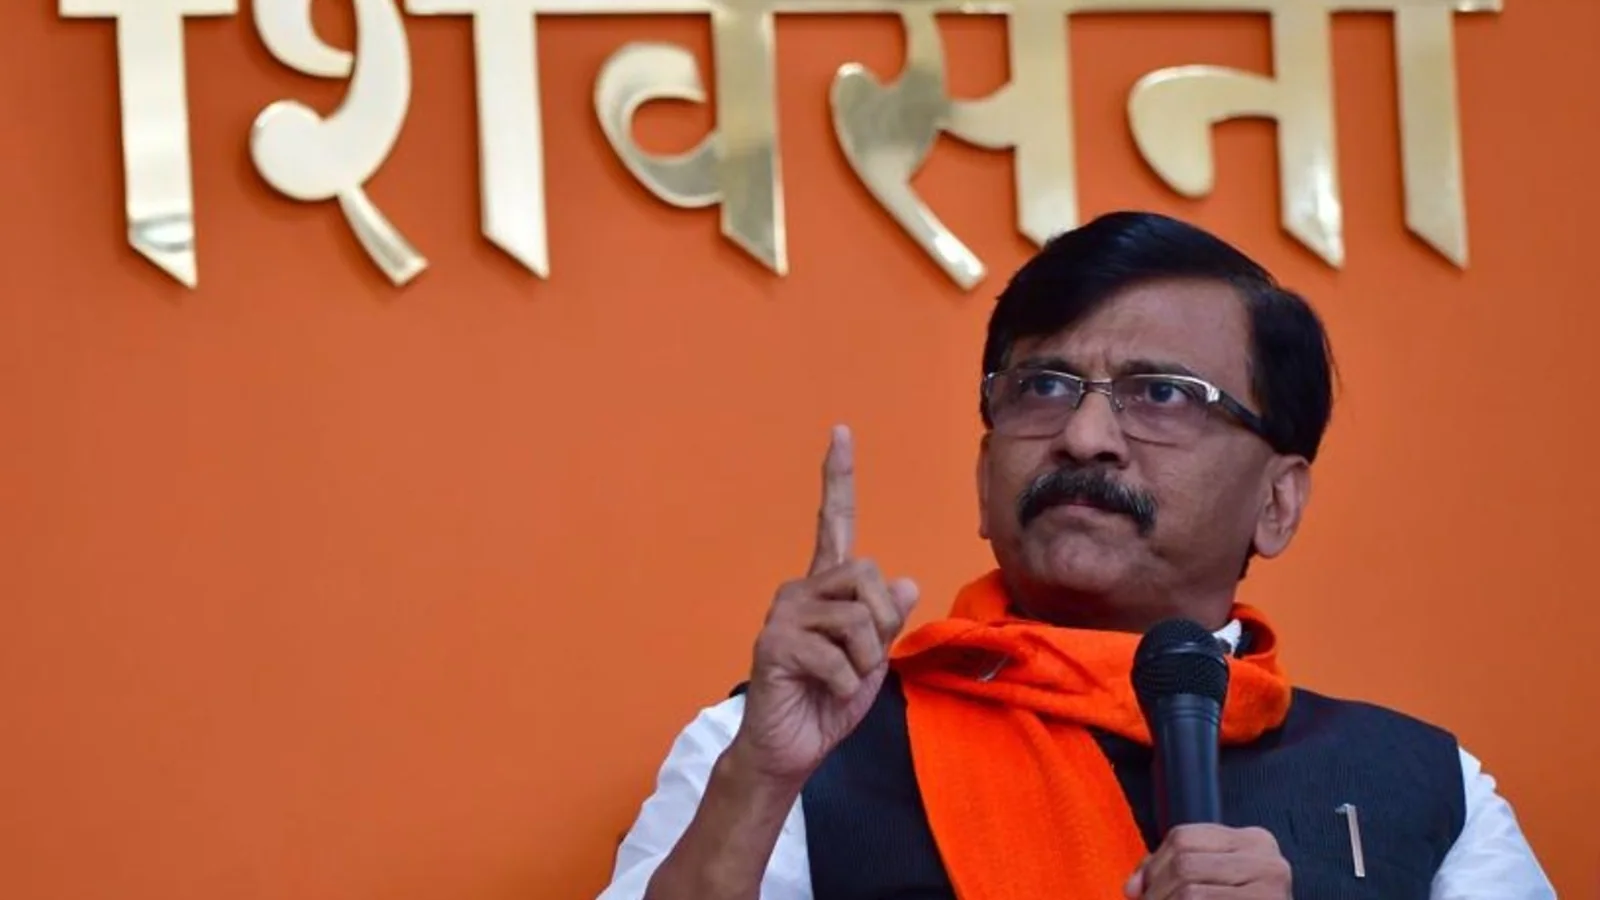 Afternoon brief: Sena’s Raut’s warning to BJP on tensions in big cities, and all the latest news